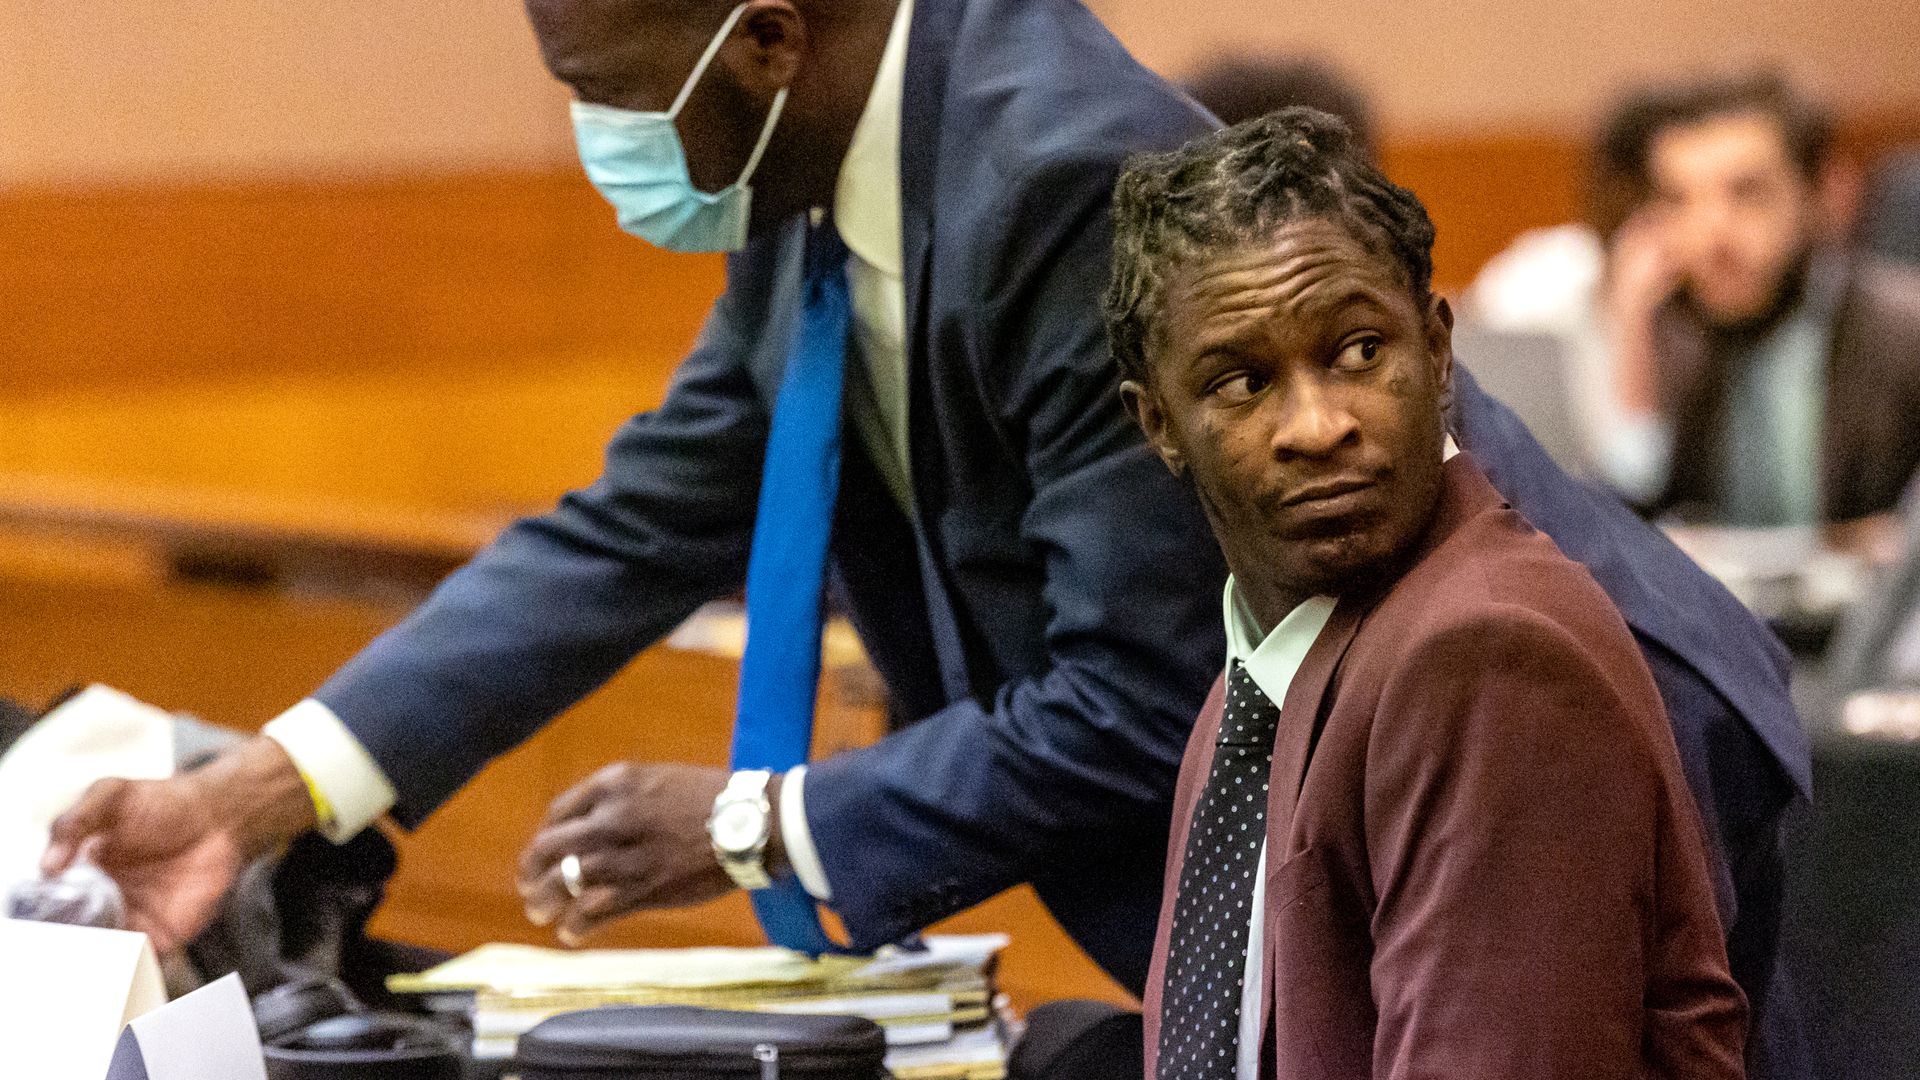 Young Thug sits at a defendant's desk in a courtroom and looks over his shoulder as his attorney wearing a surgical mask picks up a paper